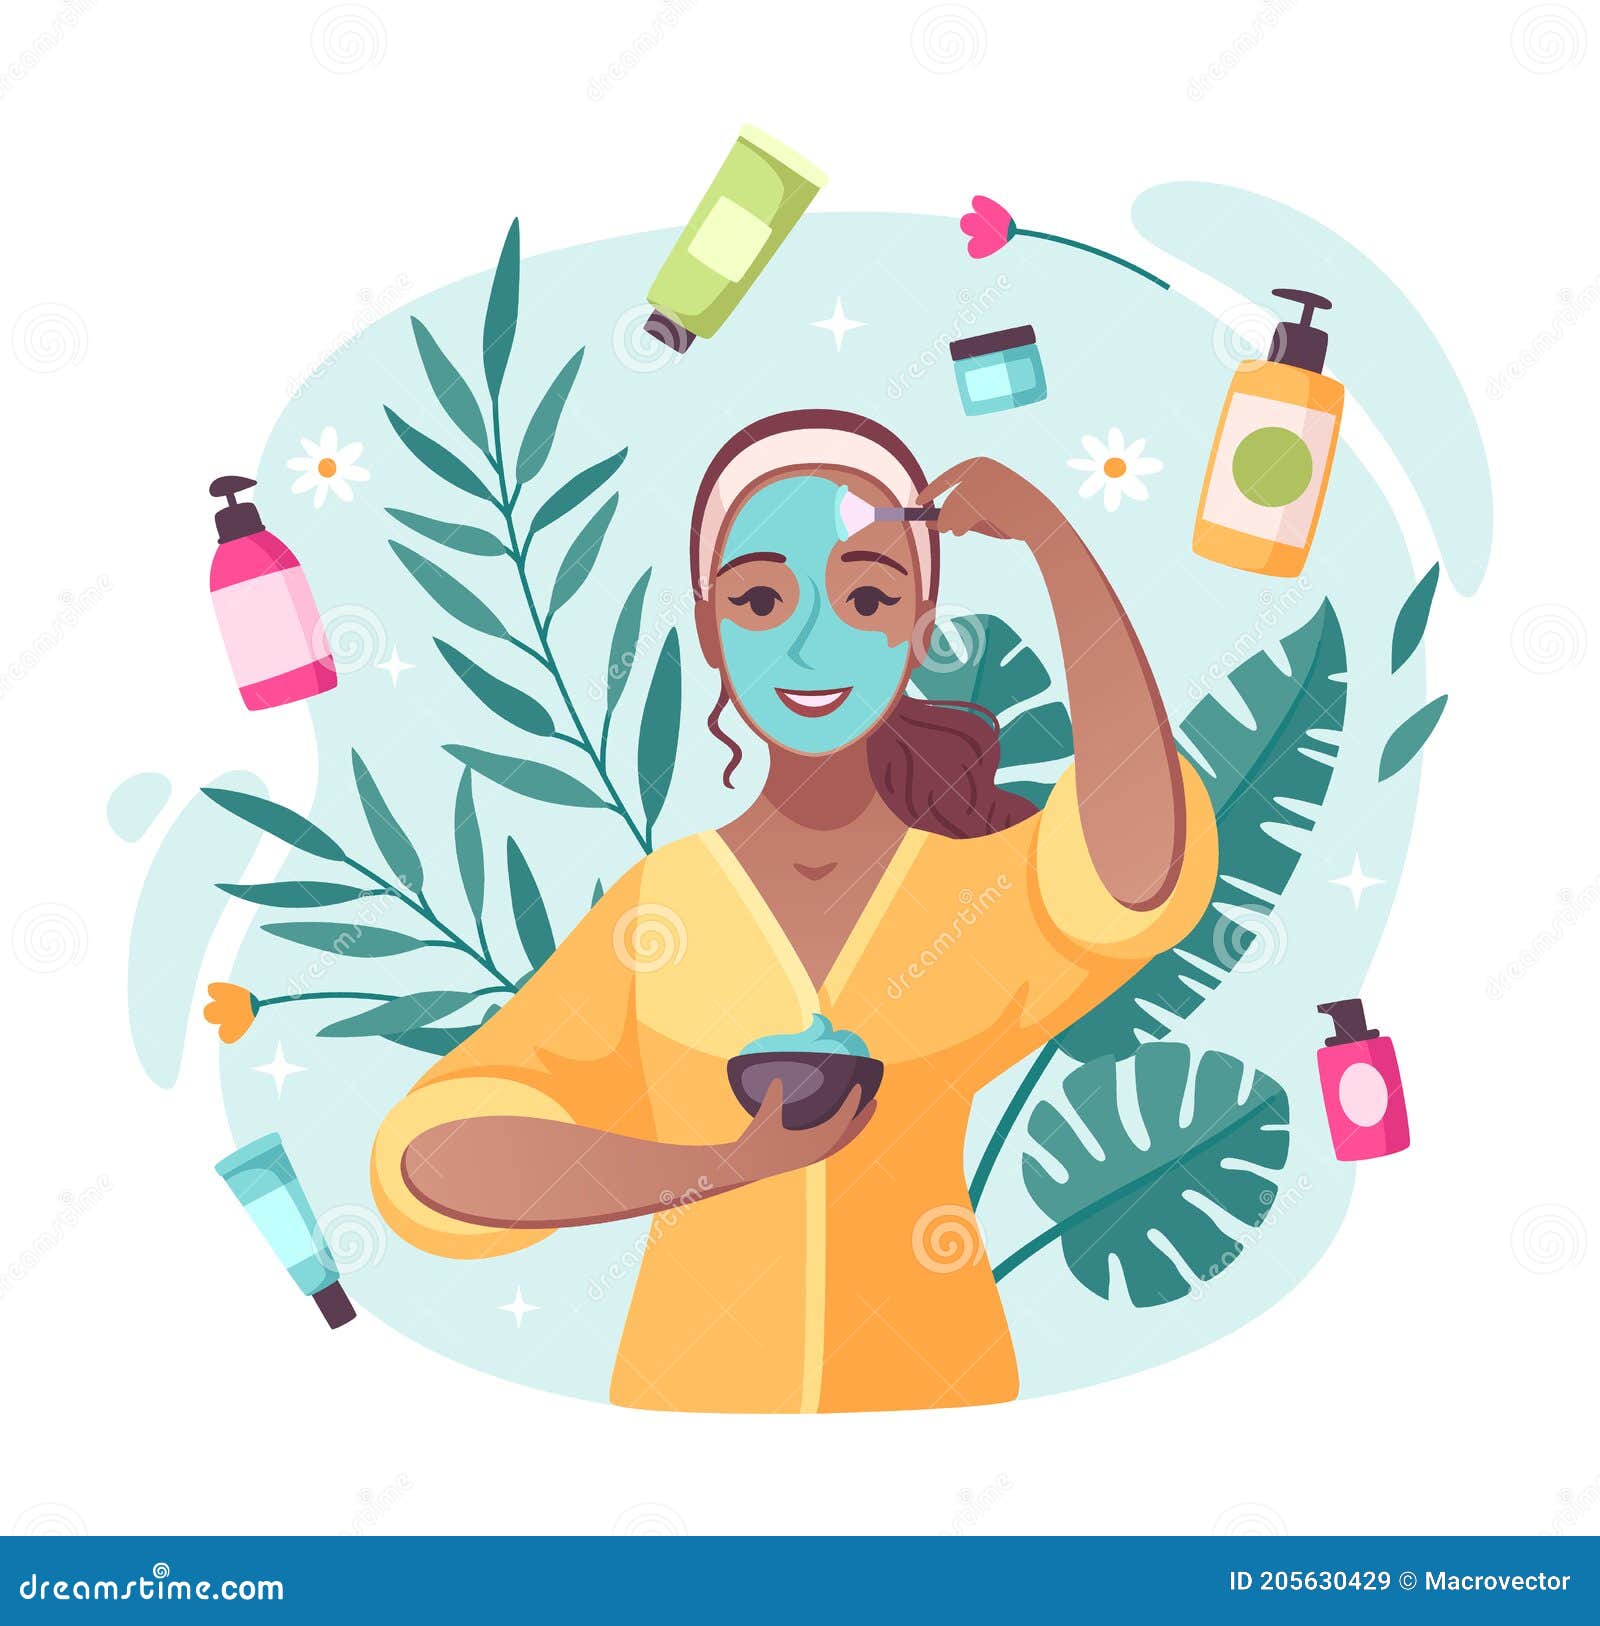 Skincare Cartoon Composition Stock Vector - Illustration of cleanser ...